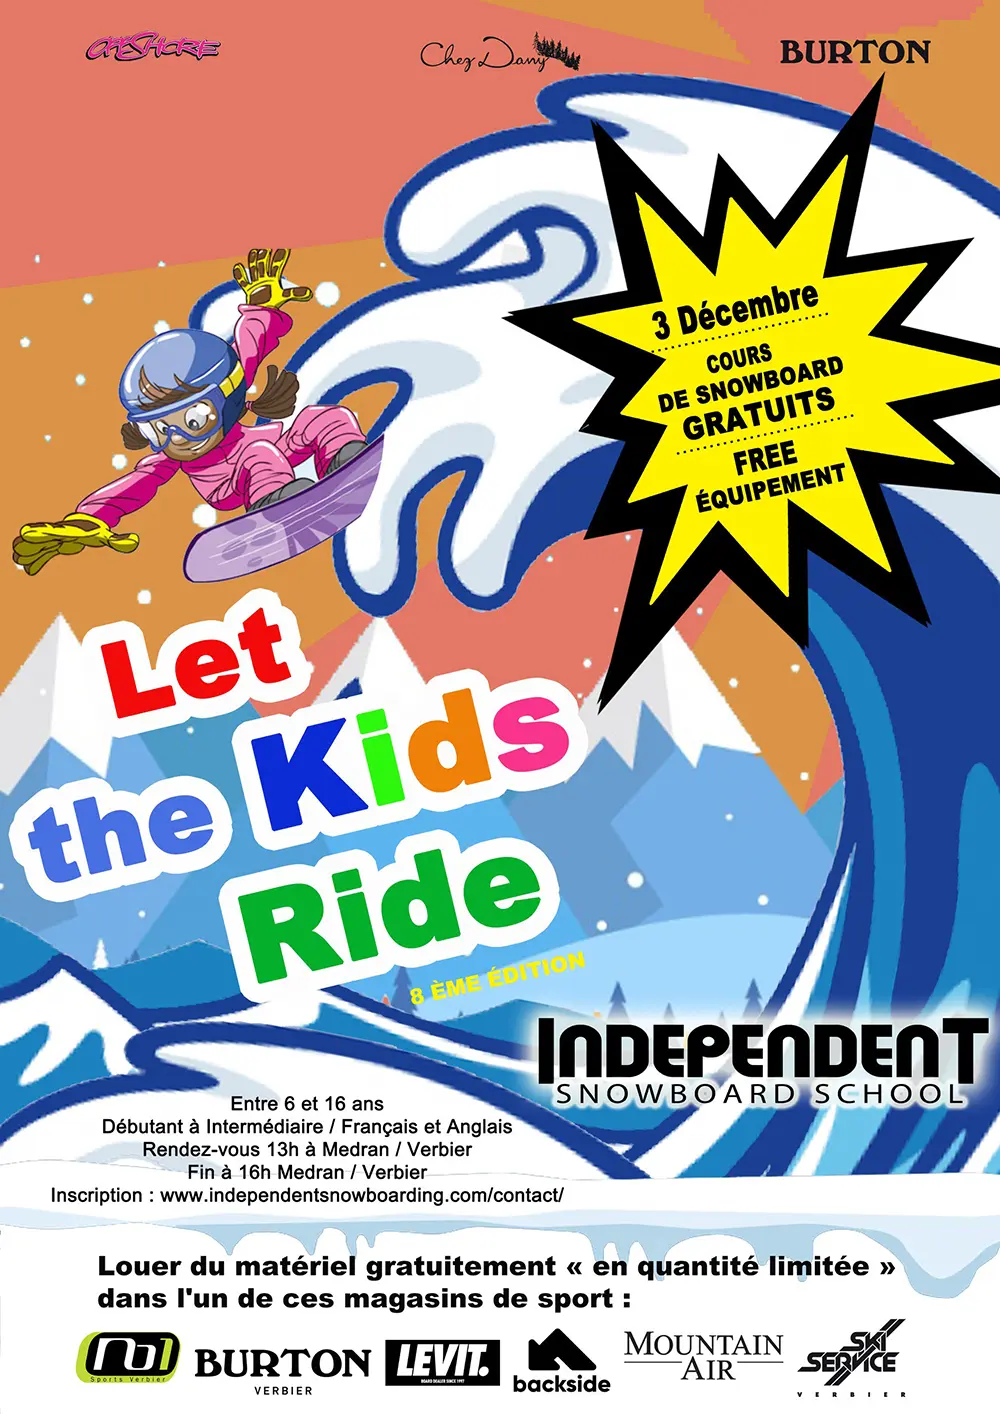 Free Snowboard event for kids in Verbier